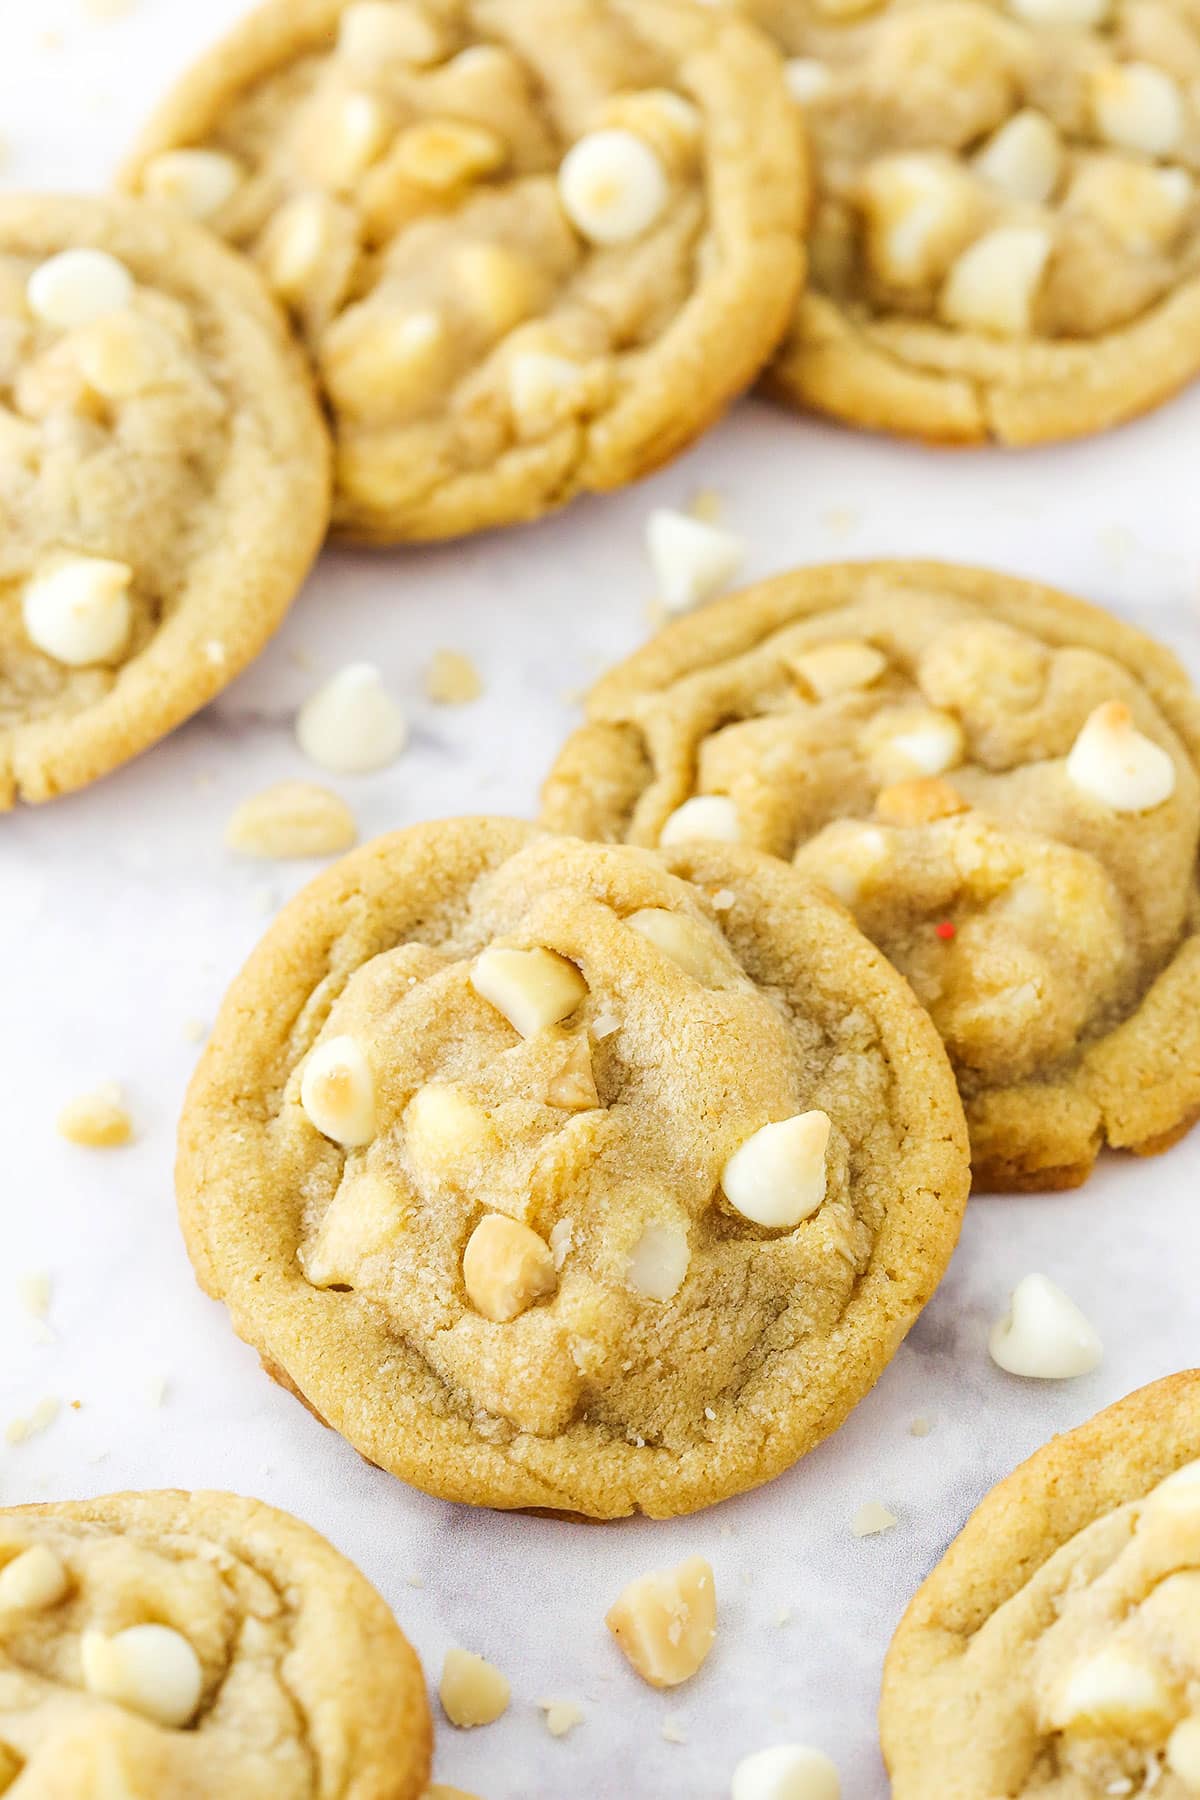 White Chocolate Macadamia Nut Cookies spread over a white marble tabletop